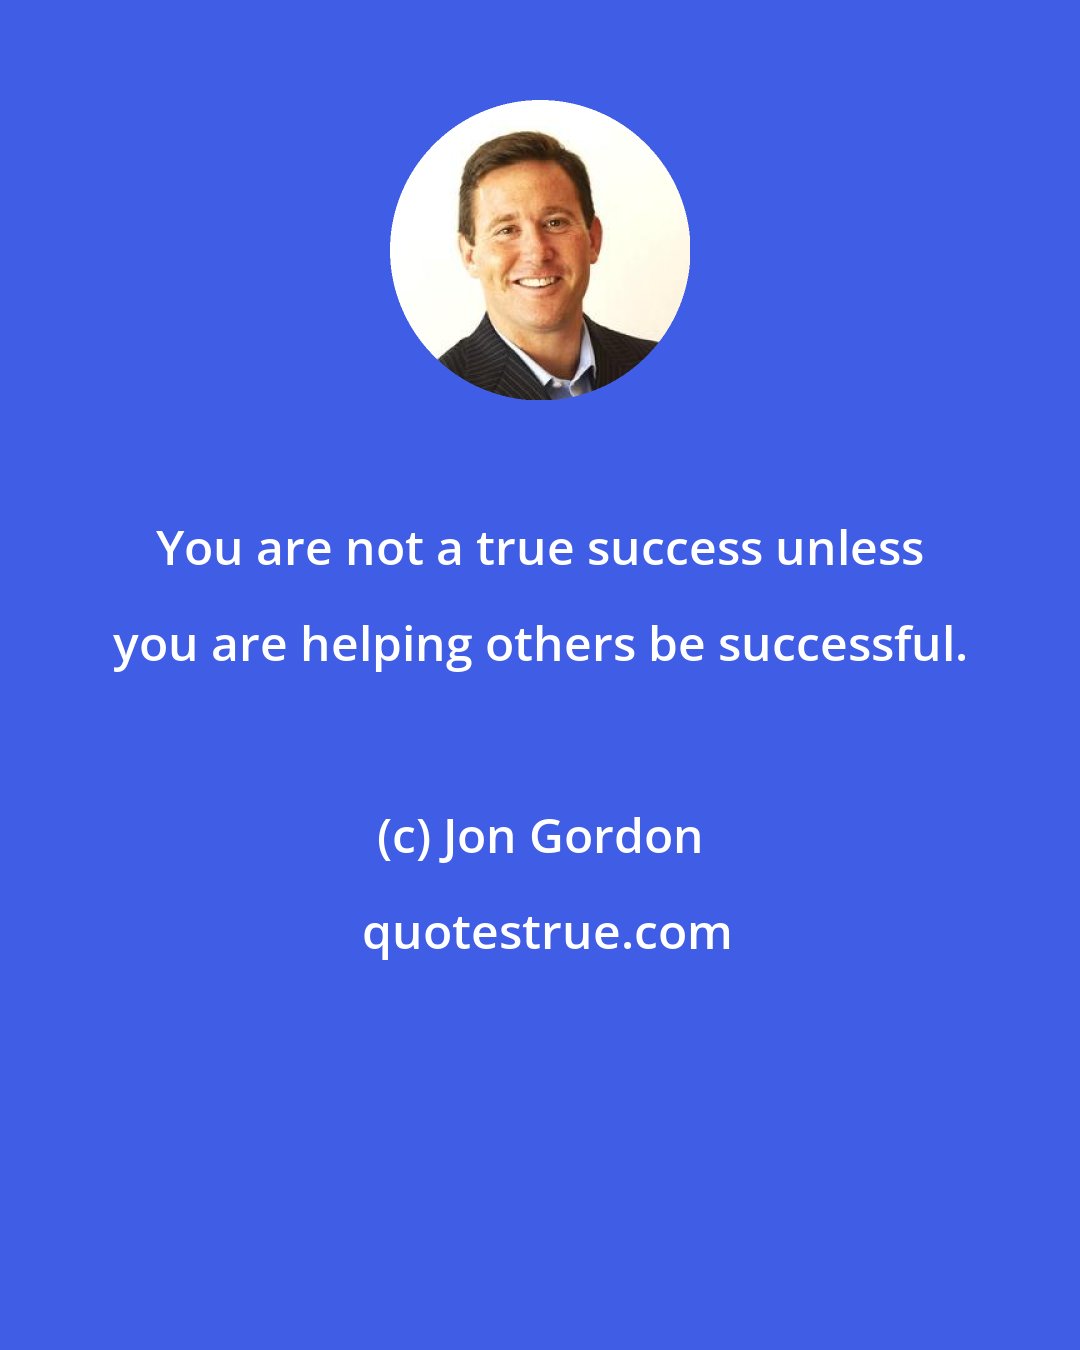 Jon Gordon: You are not a true success unless you are helping others be successful.